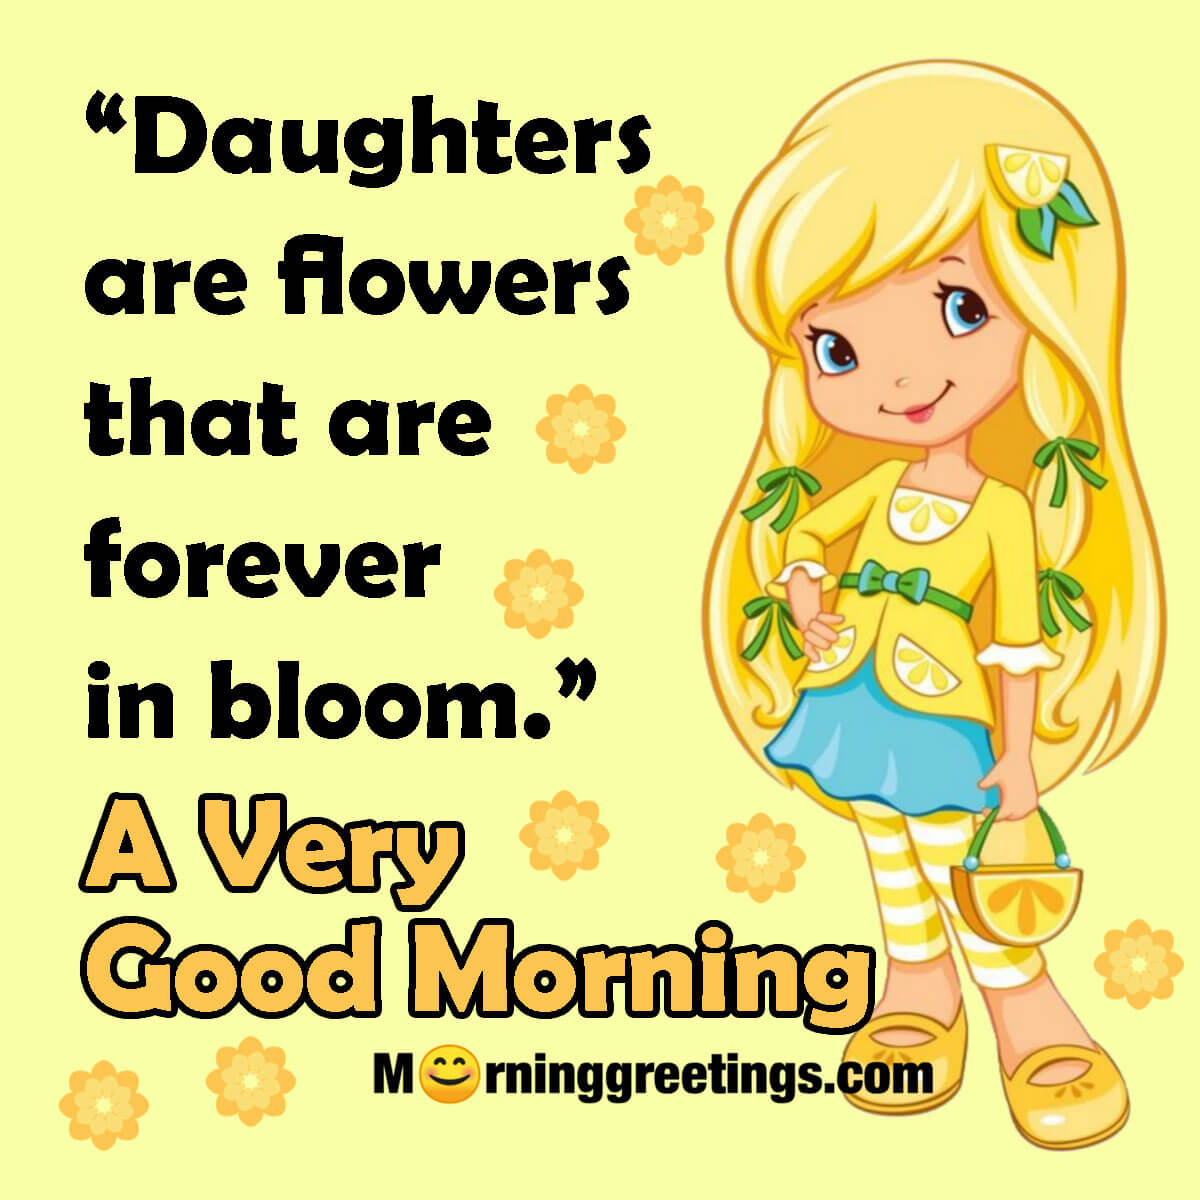 A Very Good Morning Daughters Are Flowers